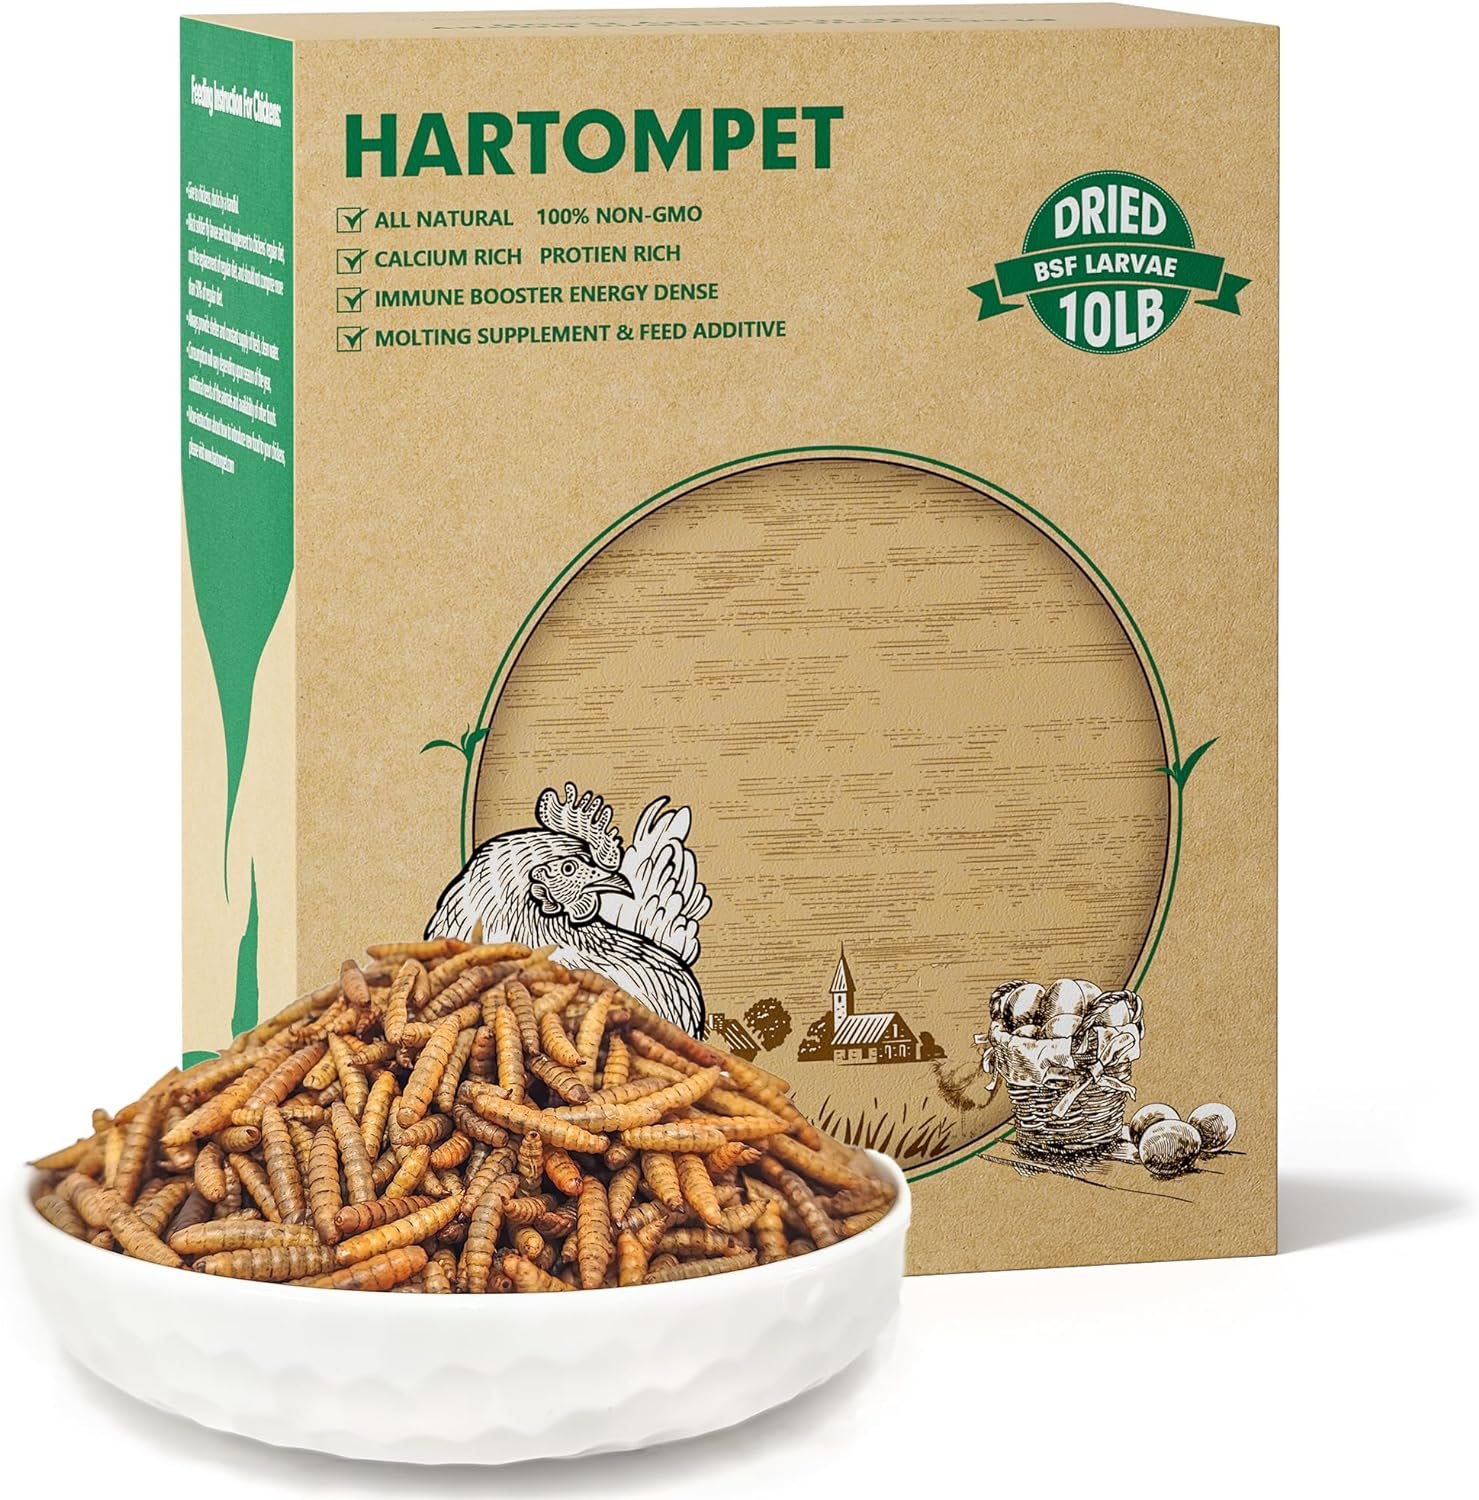 HARTOMPET 10LB Non-GMO Dried Black Soldier Fly Larvae, Superior Calcium Boost for Chickens, Better Than Dried Mealworms, Poultry Feed Ideal for Molting  Laying Hens, Wild Birds, Ducks | Top Grade BSF